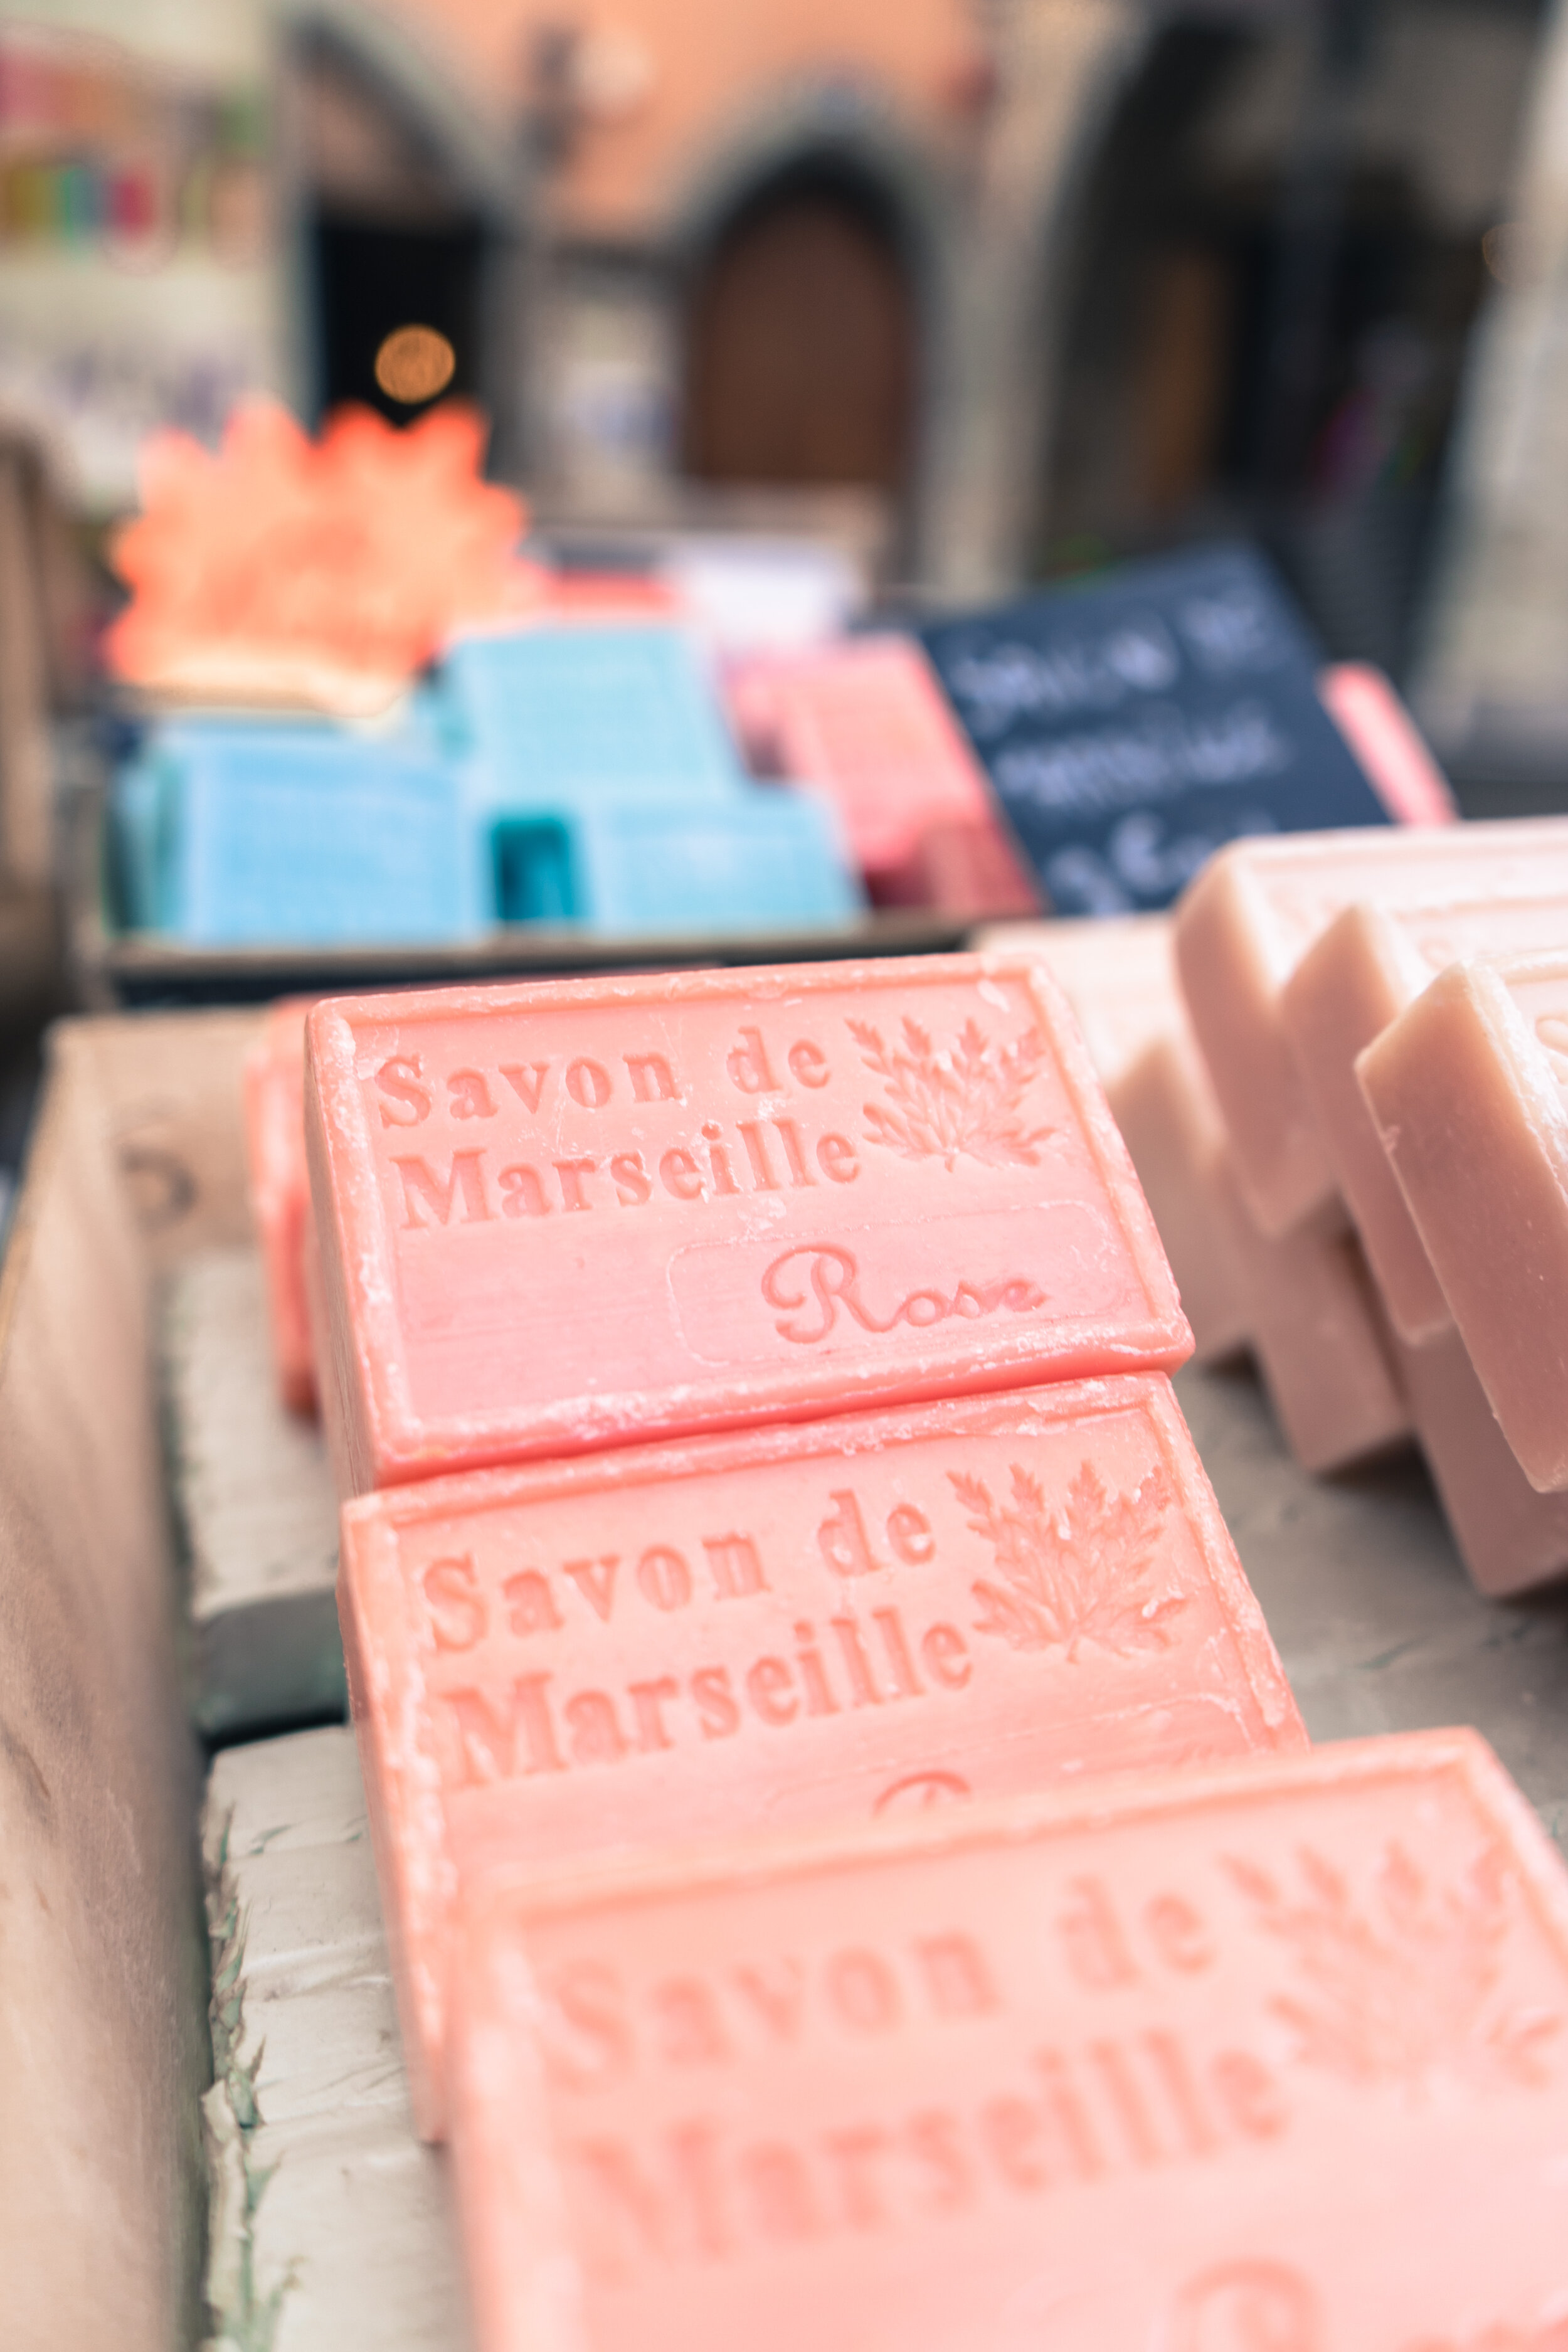  Provence is famous for natural handmade soaps - breathe in the scents and select your favorite 